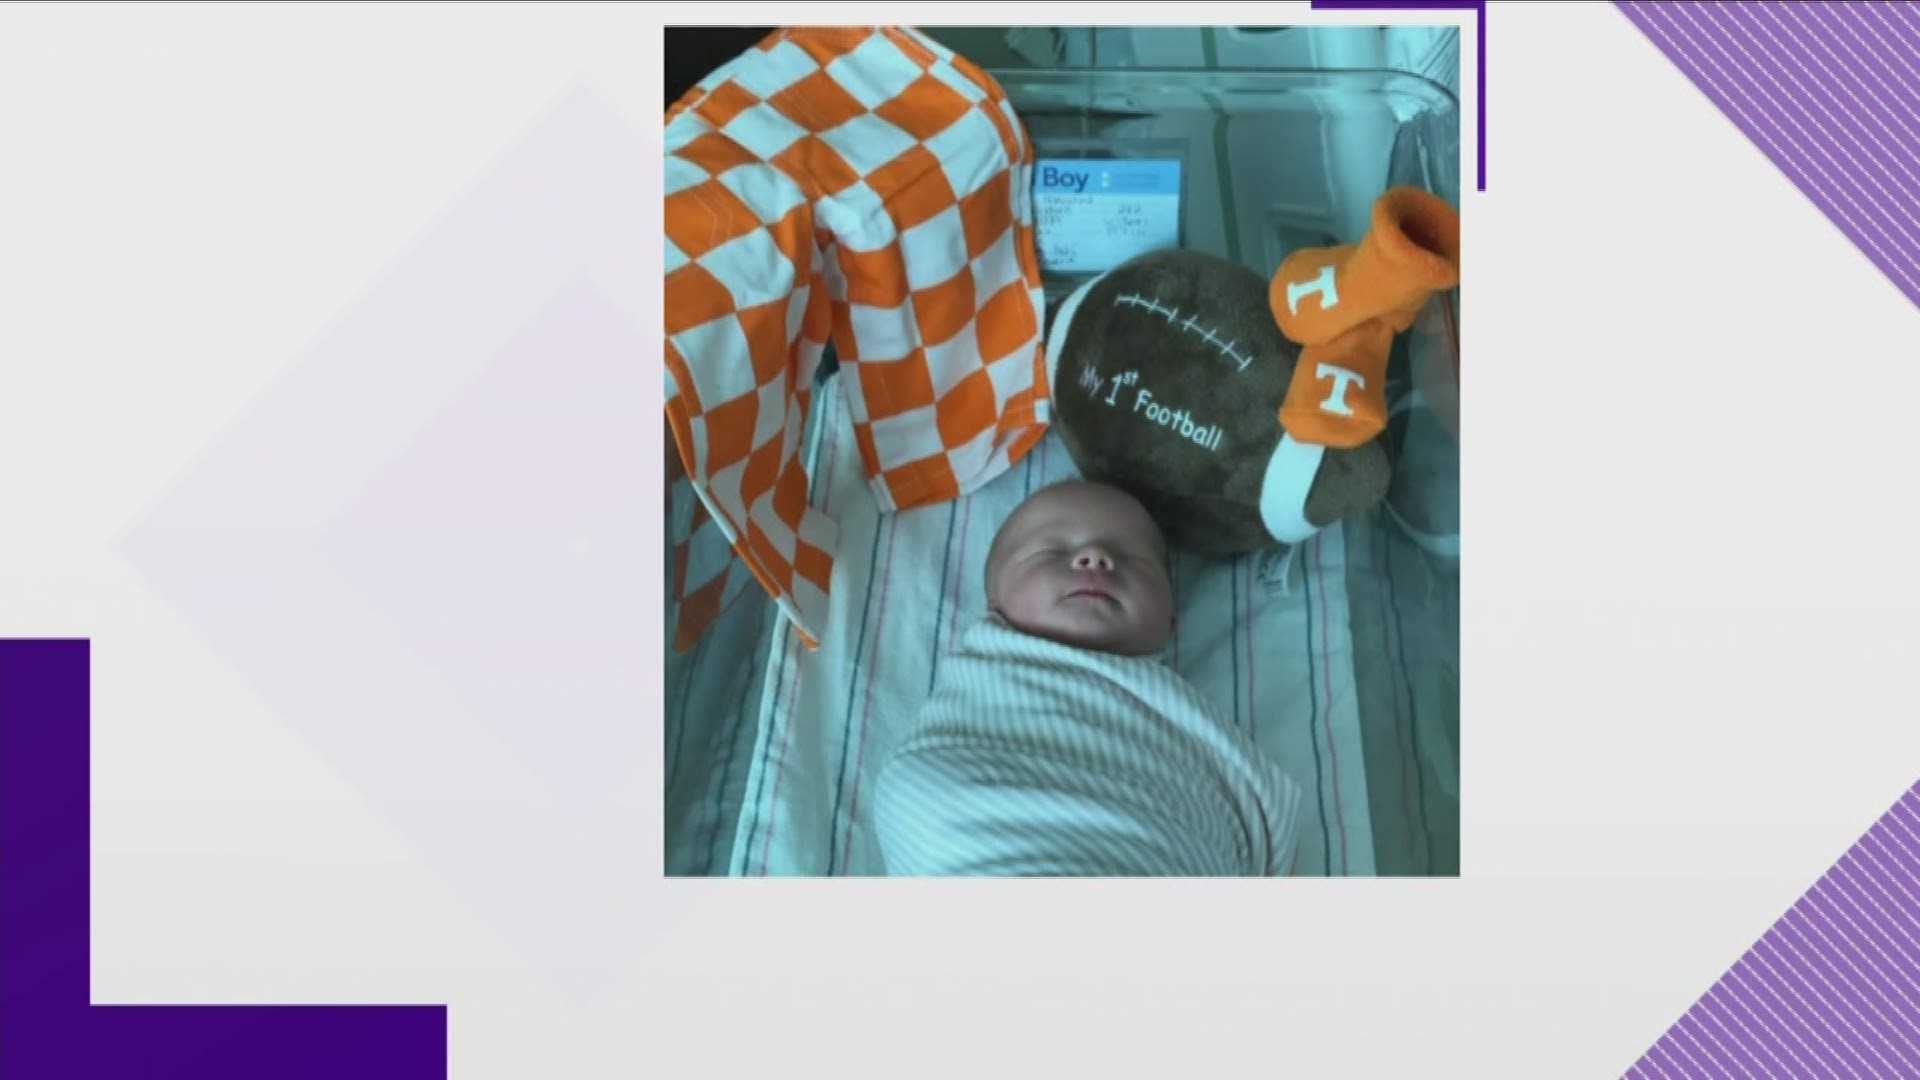 Parents Jordan and Kirsten Blanchard of White Pine, Tennessee welcomed a baby boy named 'Neyland' on Friday.